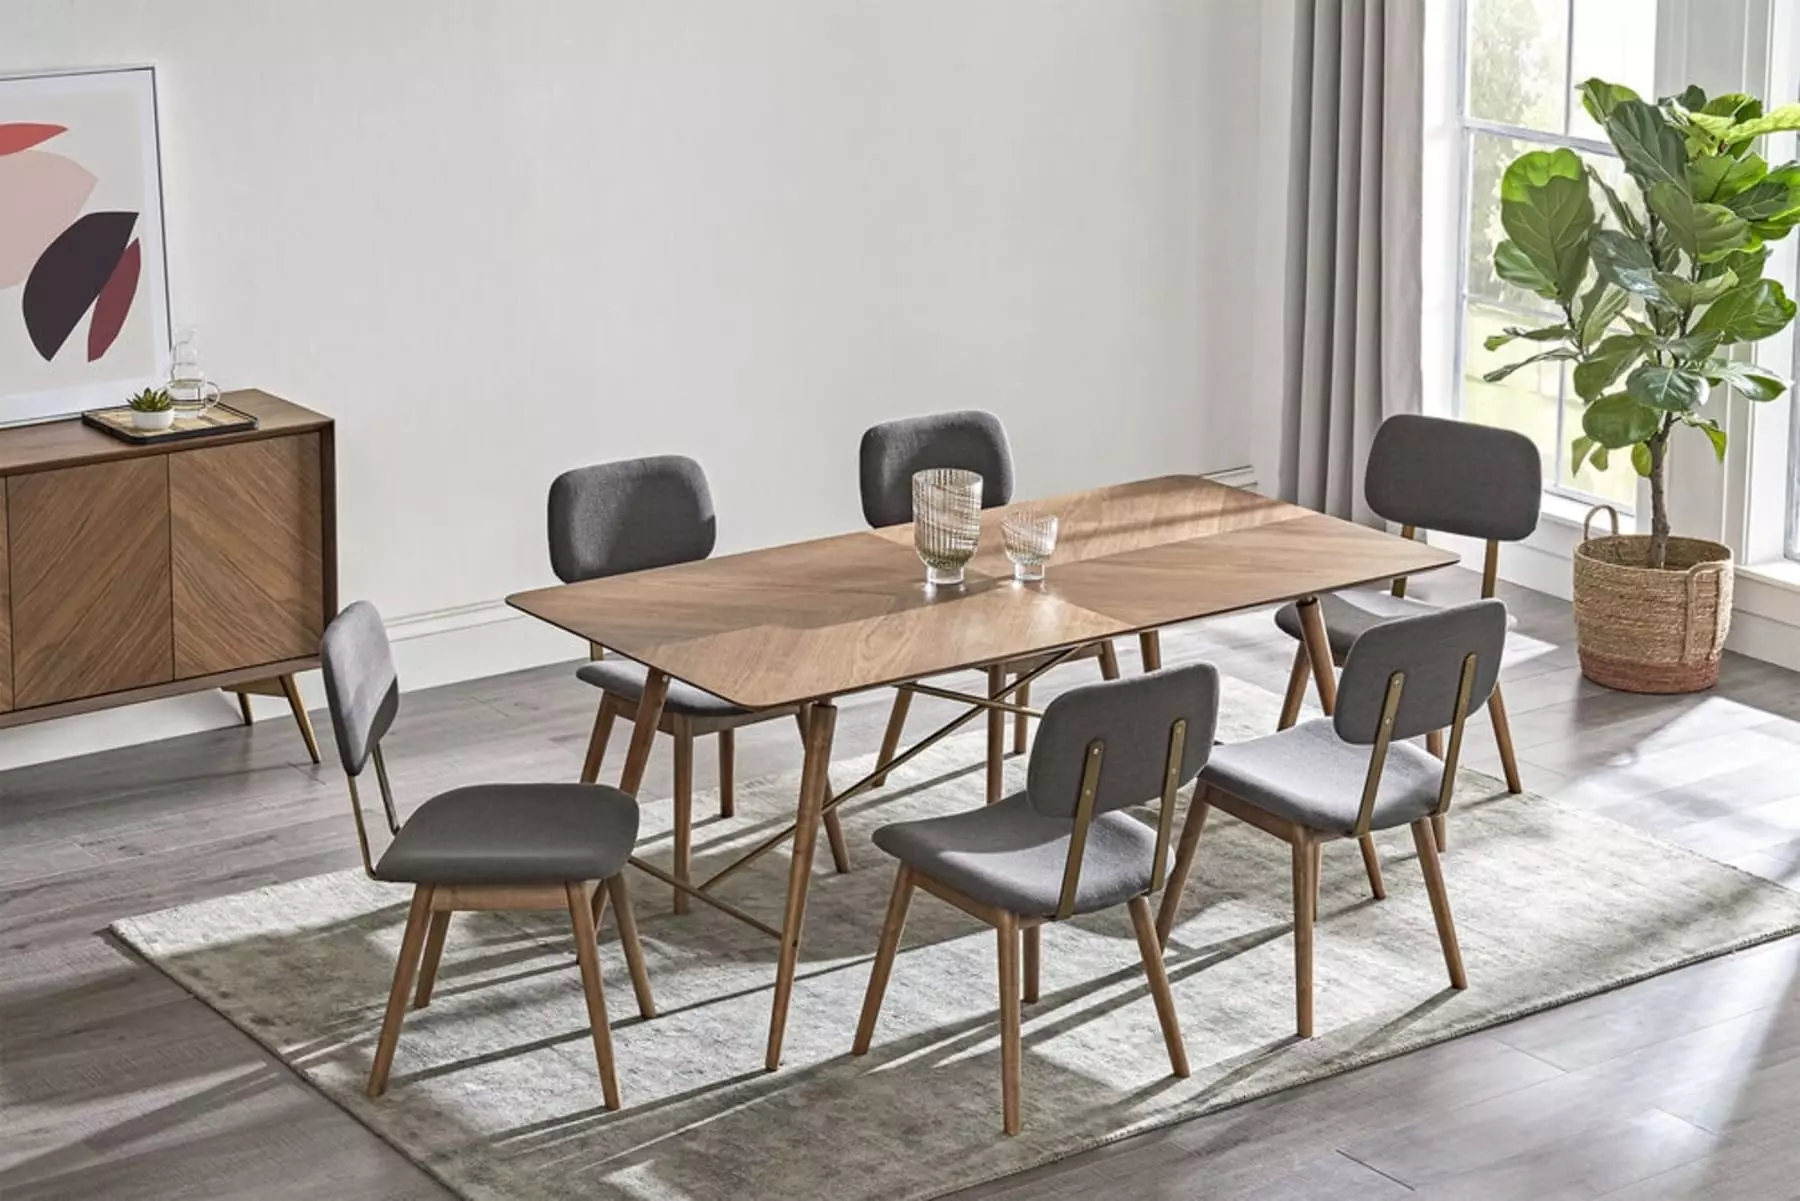 A wooden dining table set with tapered legs and matching chairs.